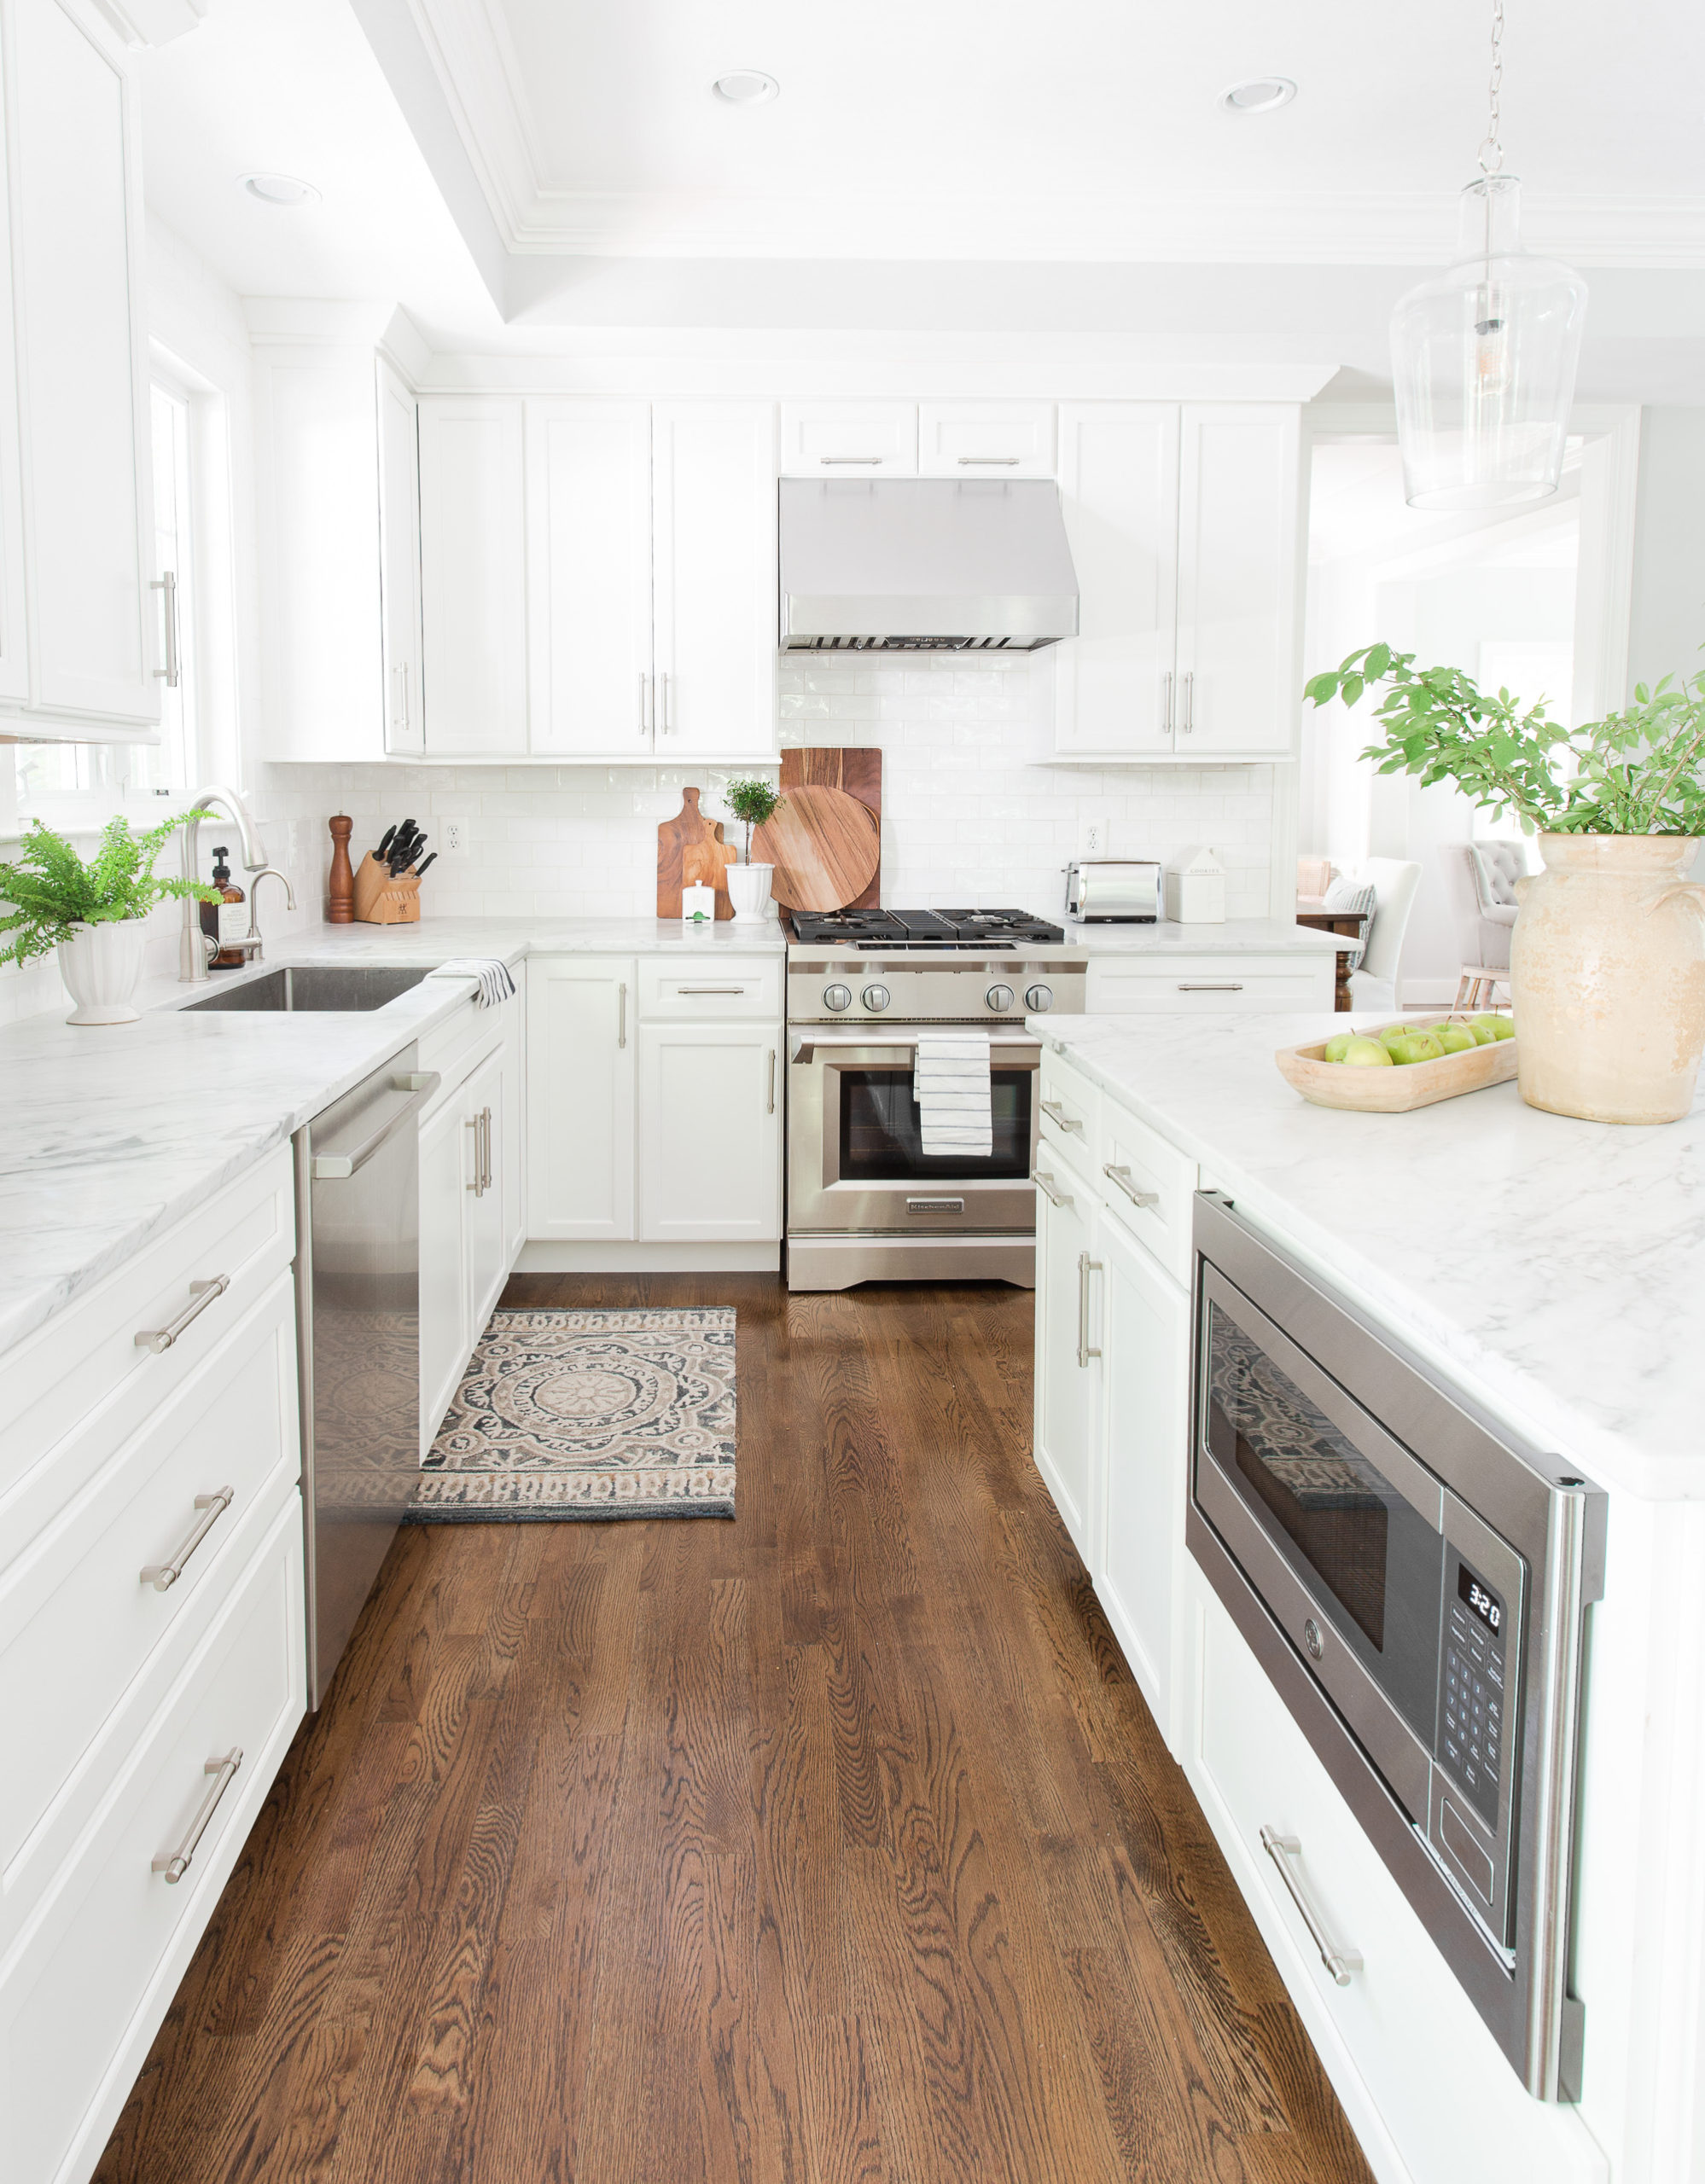 white kitchen with wood floors, gas range, microwave in island and vase of greenery on island countertop